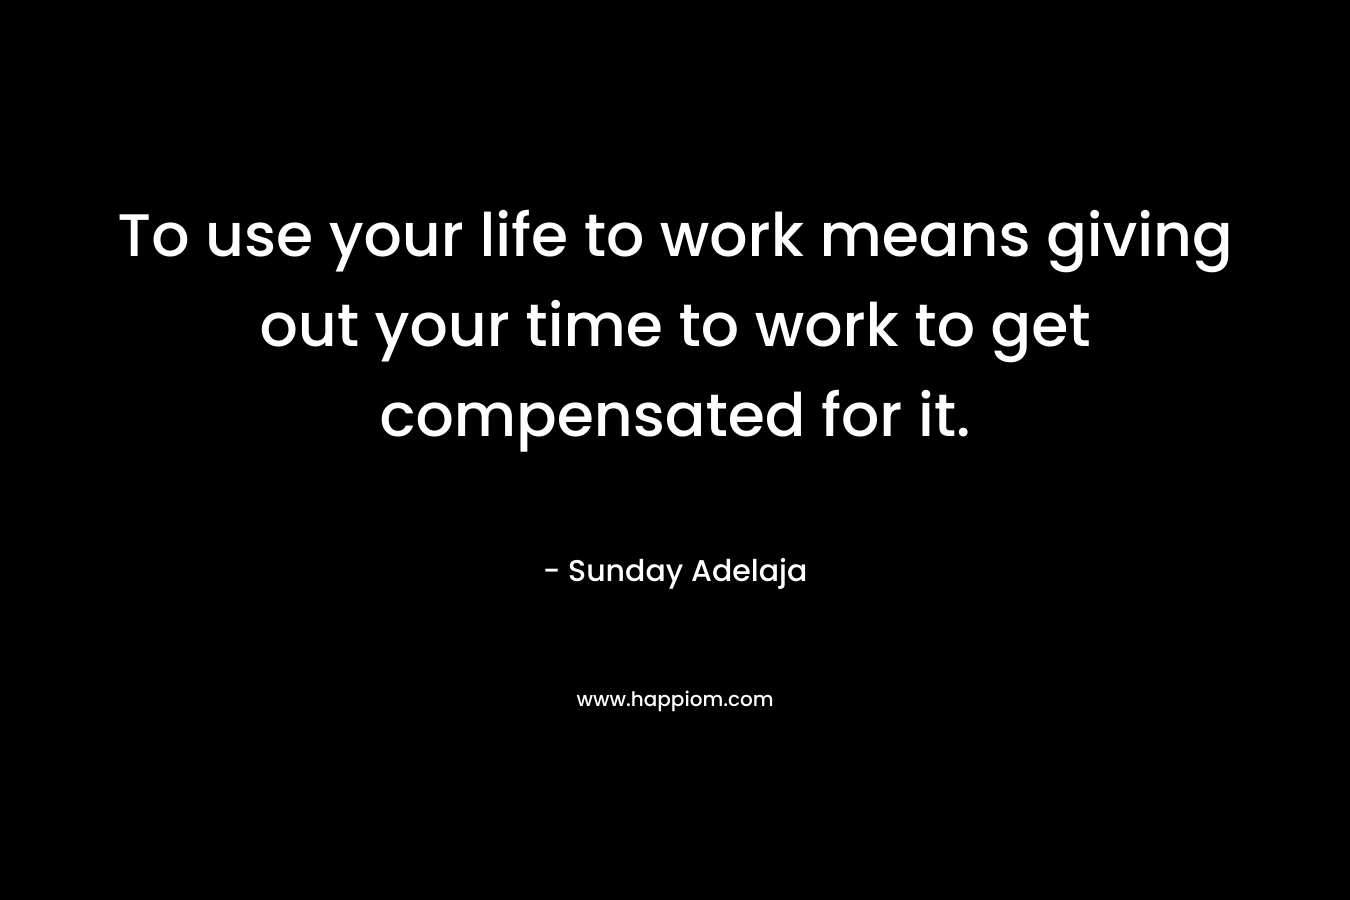 To use your life to work means giving out your time to work to get compensated for it. – Sunday Adelaja